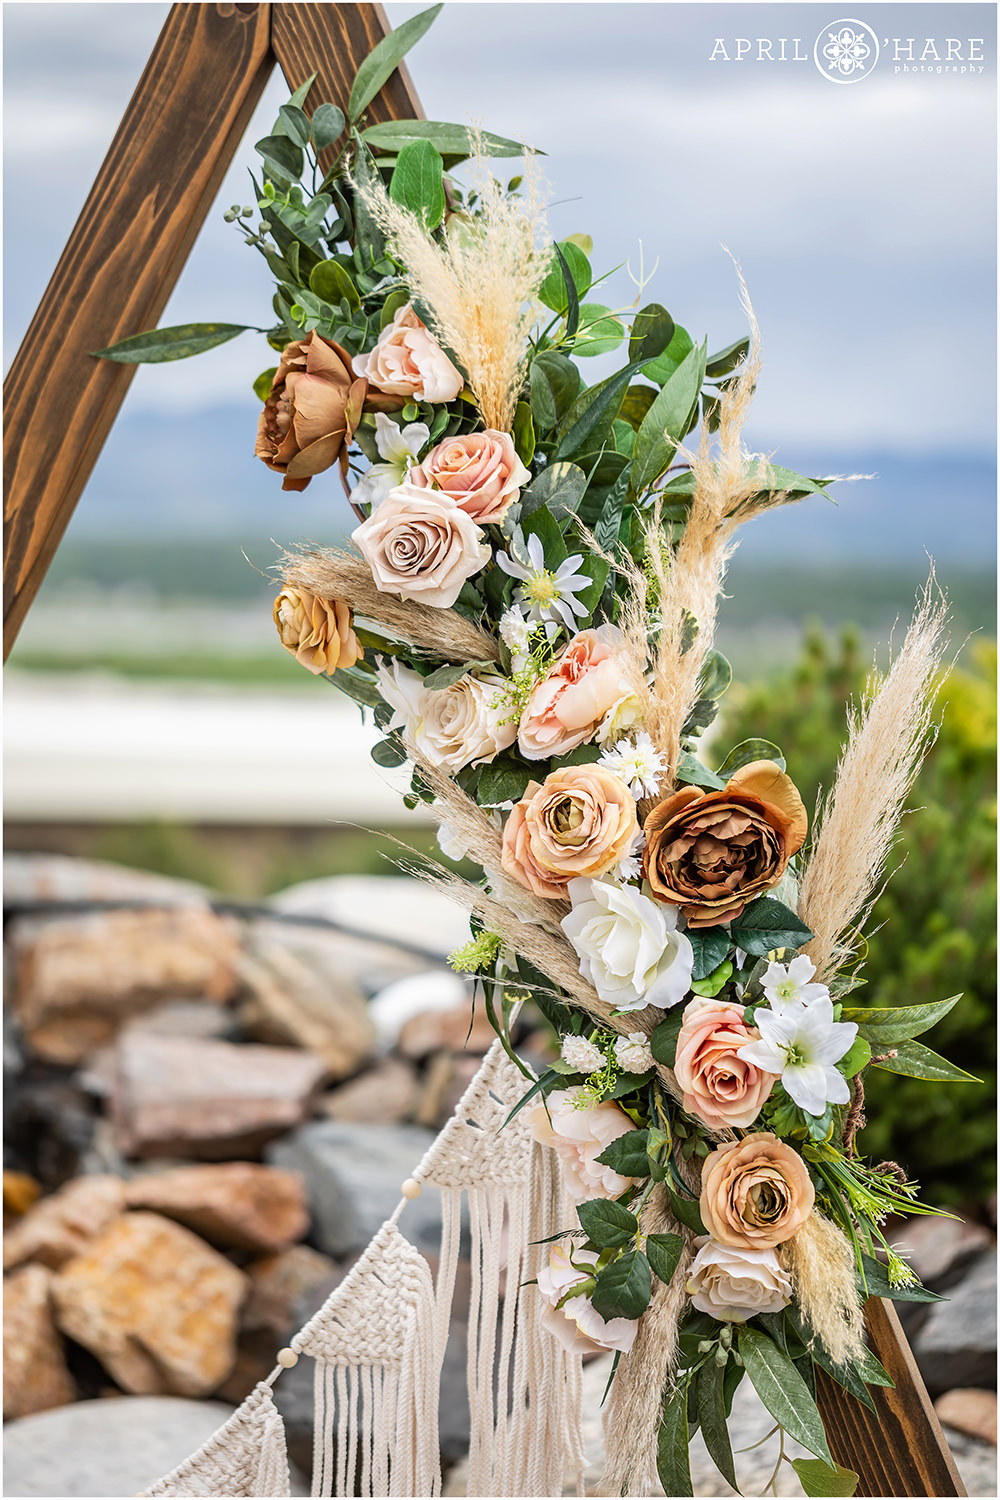 Detail photo of the bohemian florals using faux silk flowers created by Flintwood Florist in Littleton, Colorado